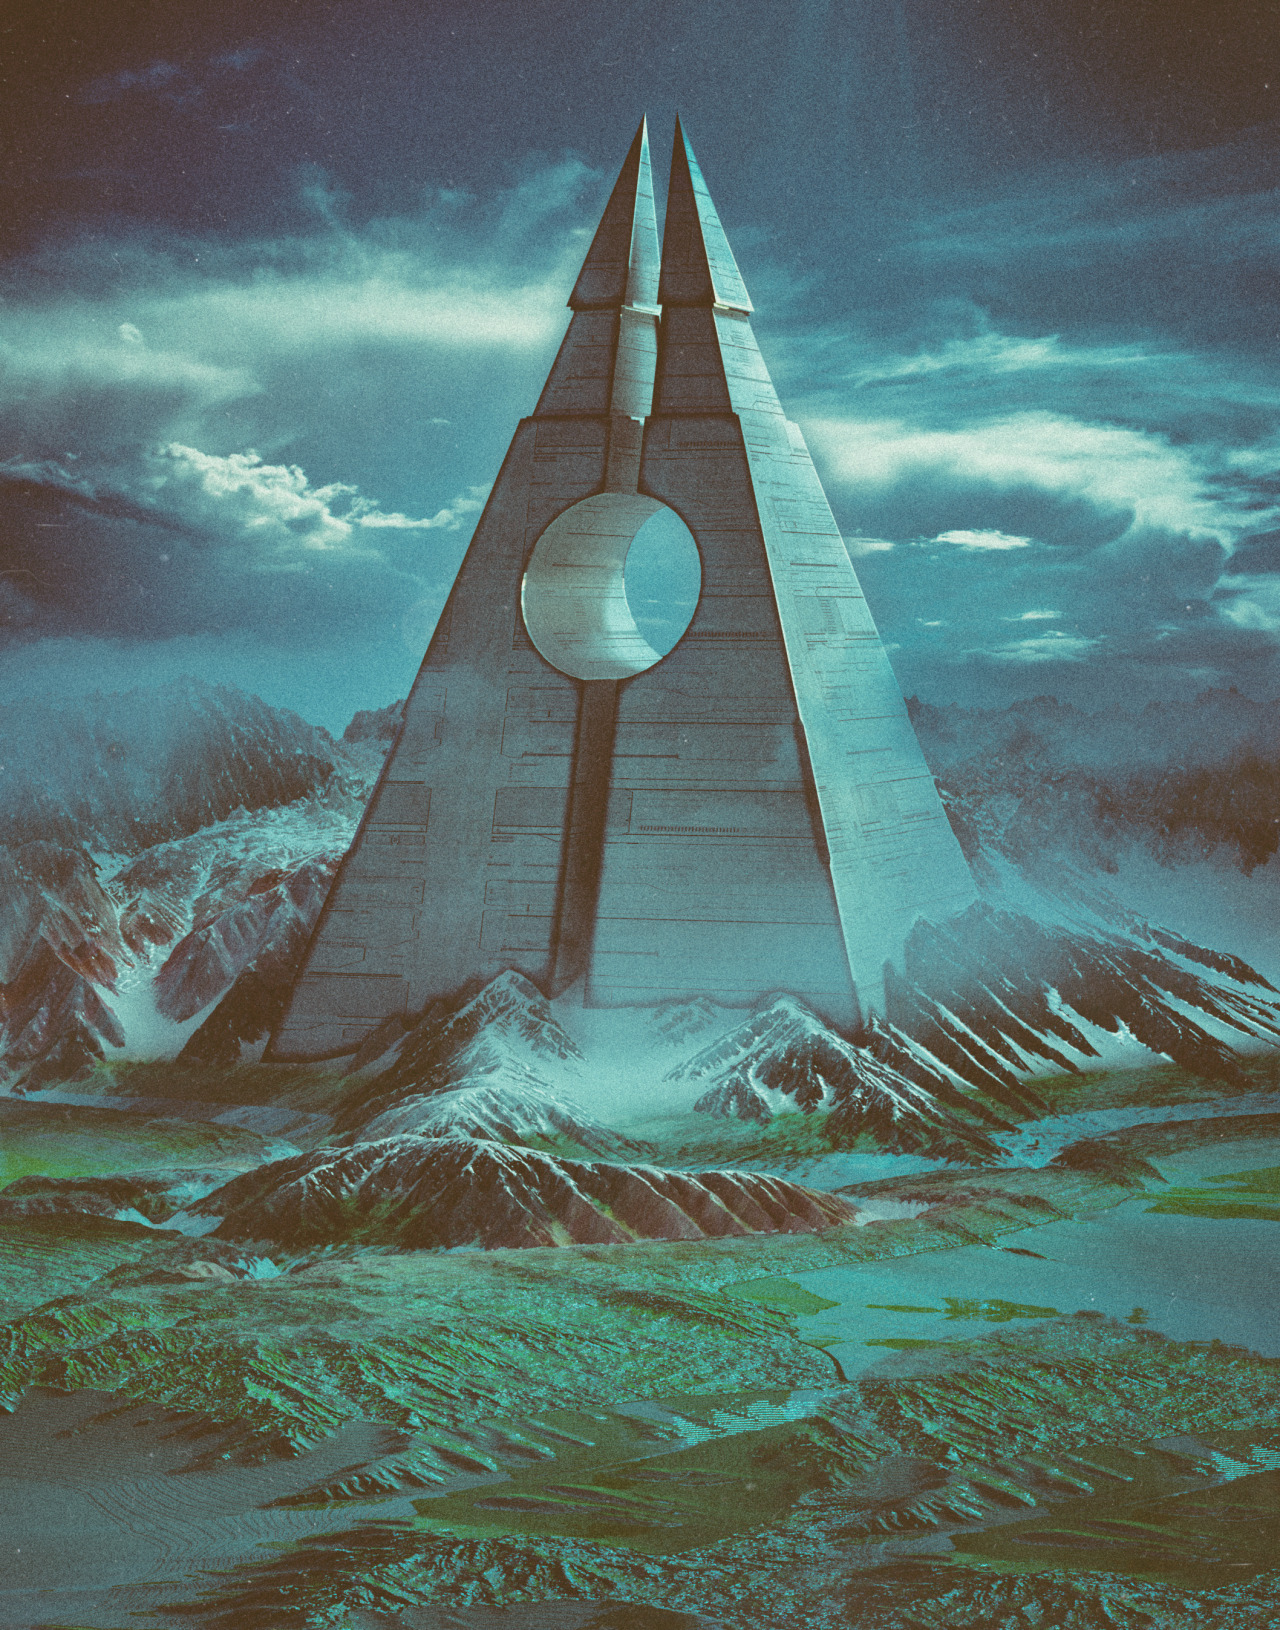 Looking for similar Posts? Follow me! therewillbeeffects.tumblr.com/ http://ift.tt/1KchC3Y kevinohlsson.com | Source: beeple